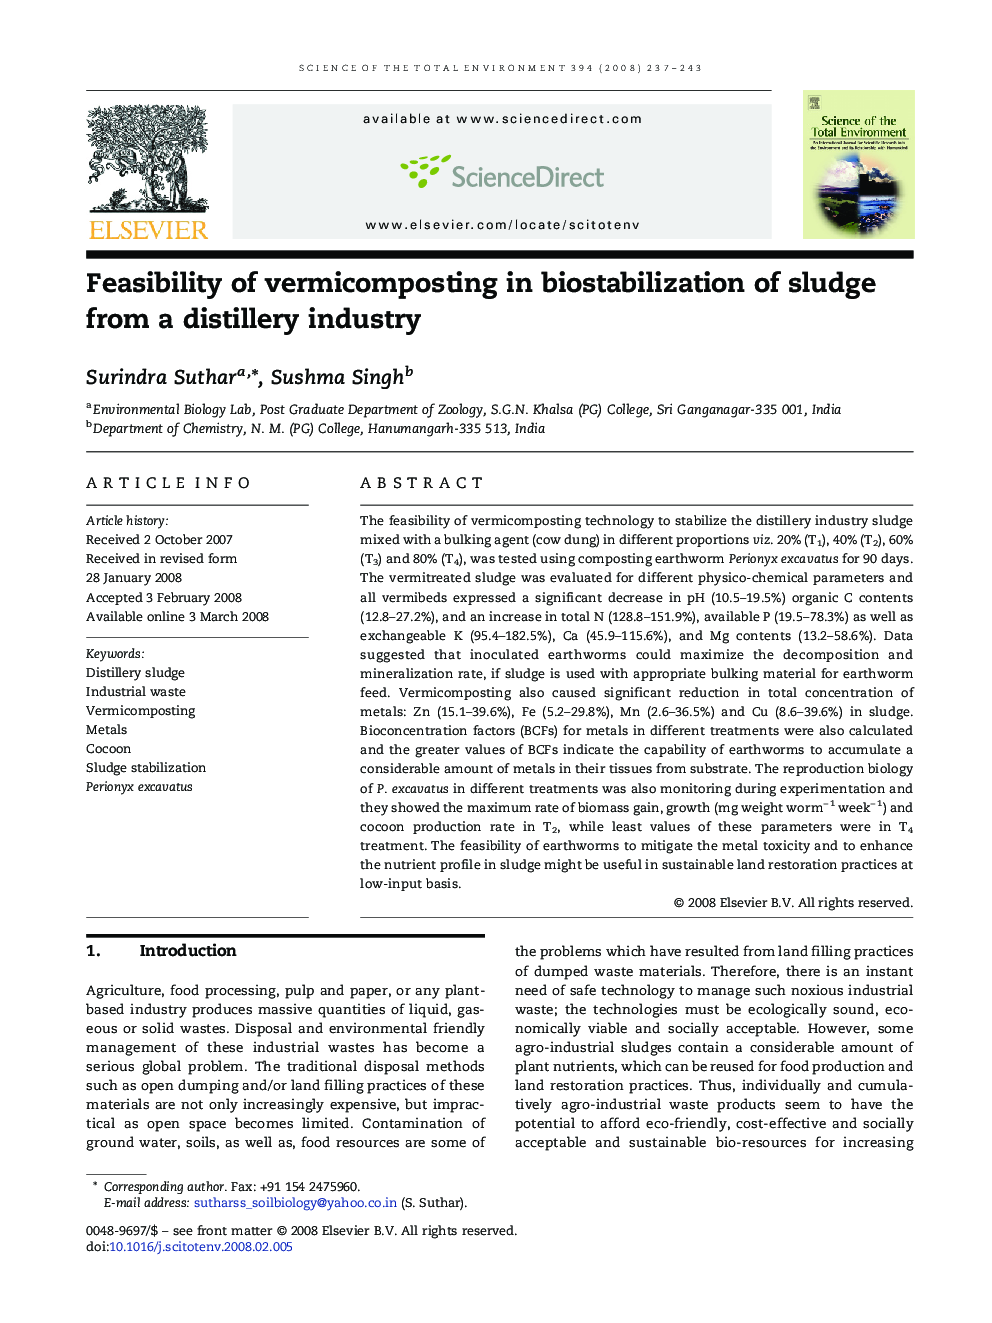 Feasibility of vermicomposting in biostabilization of sludge from a distillery industry